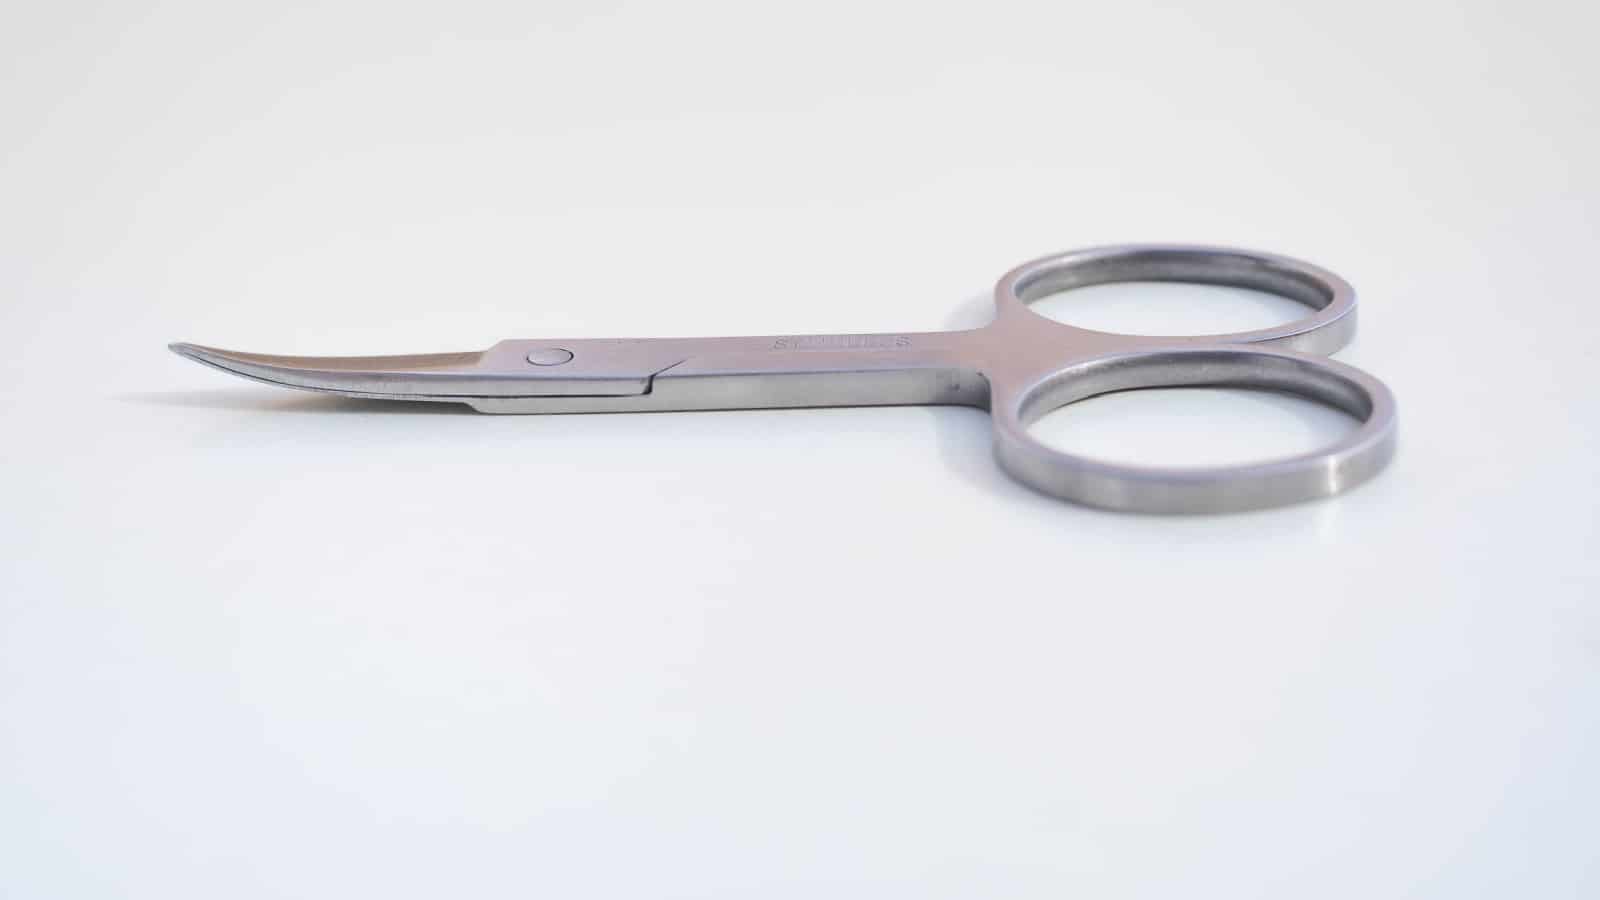 a small pair of scissors, nail scissors on white background